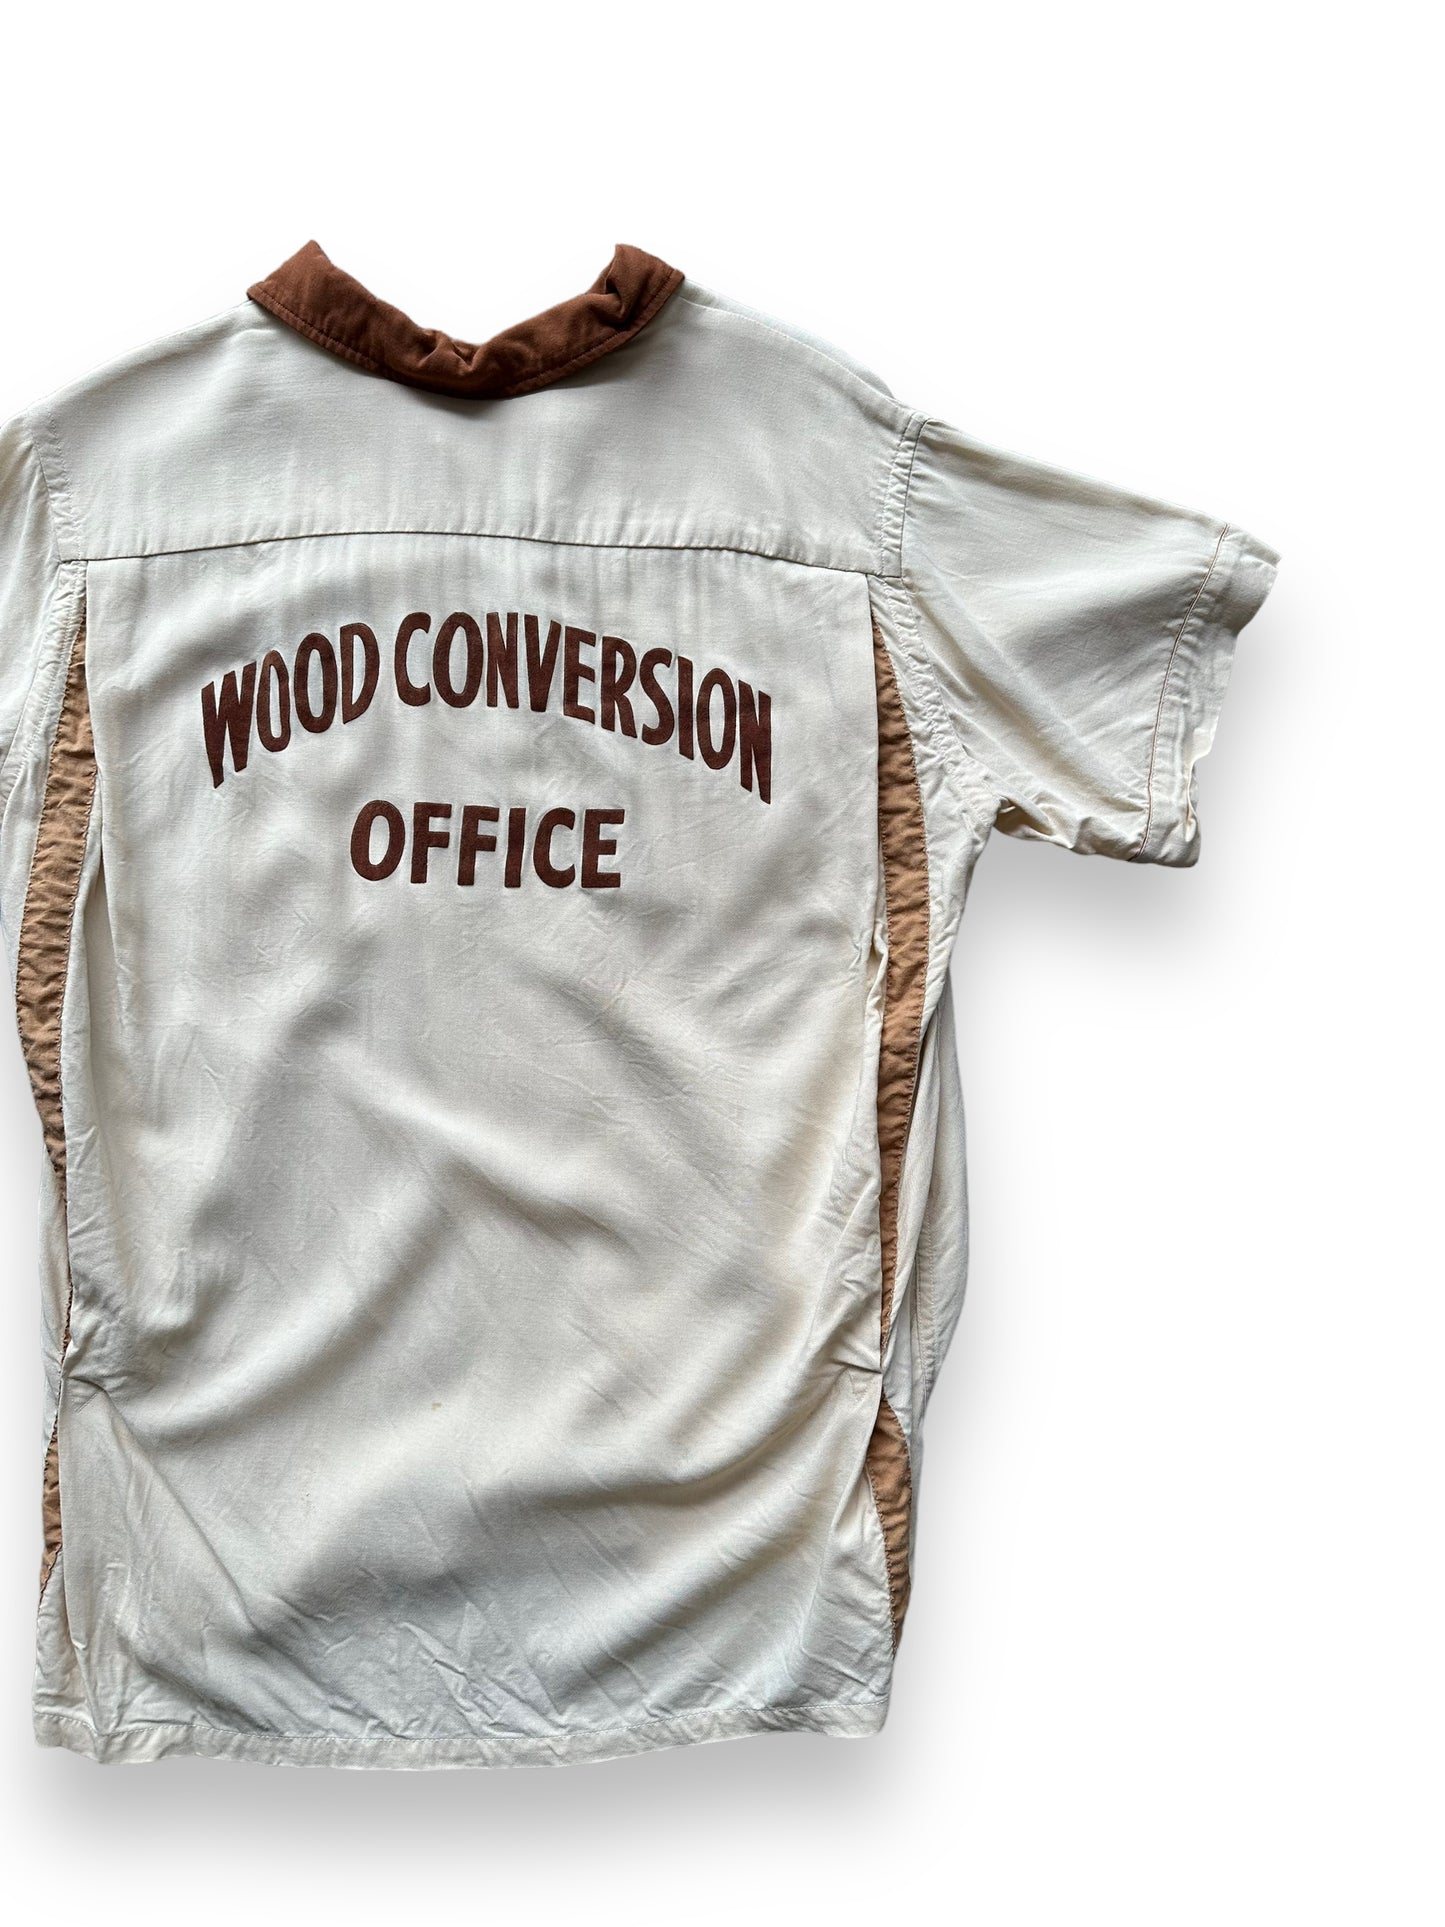 Back right of Vintage "Wood Conversion Office" Bowling Shirt SZ M | Vintage Bowling Shirt Seattle | Barn Owl Vintage Seattle